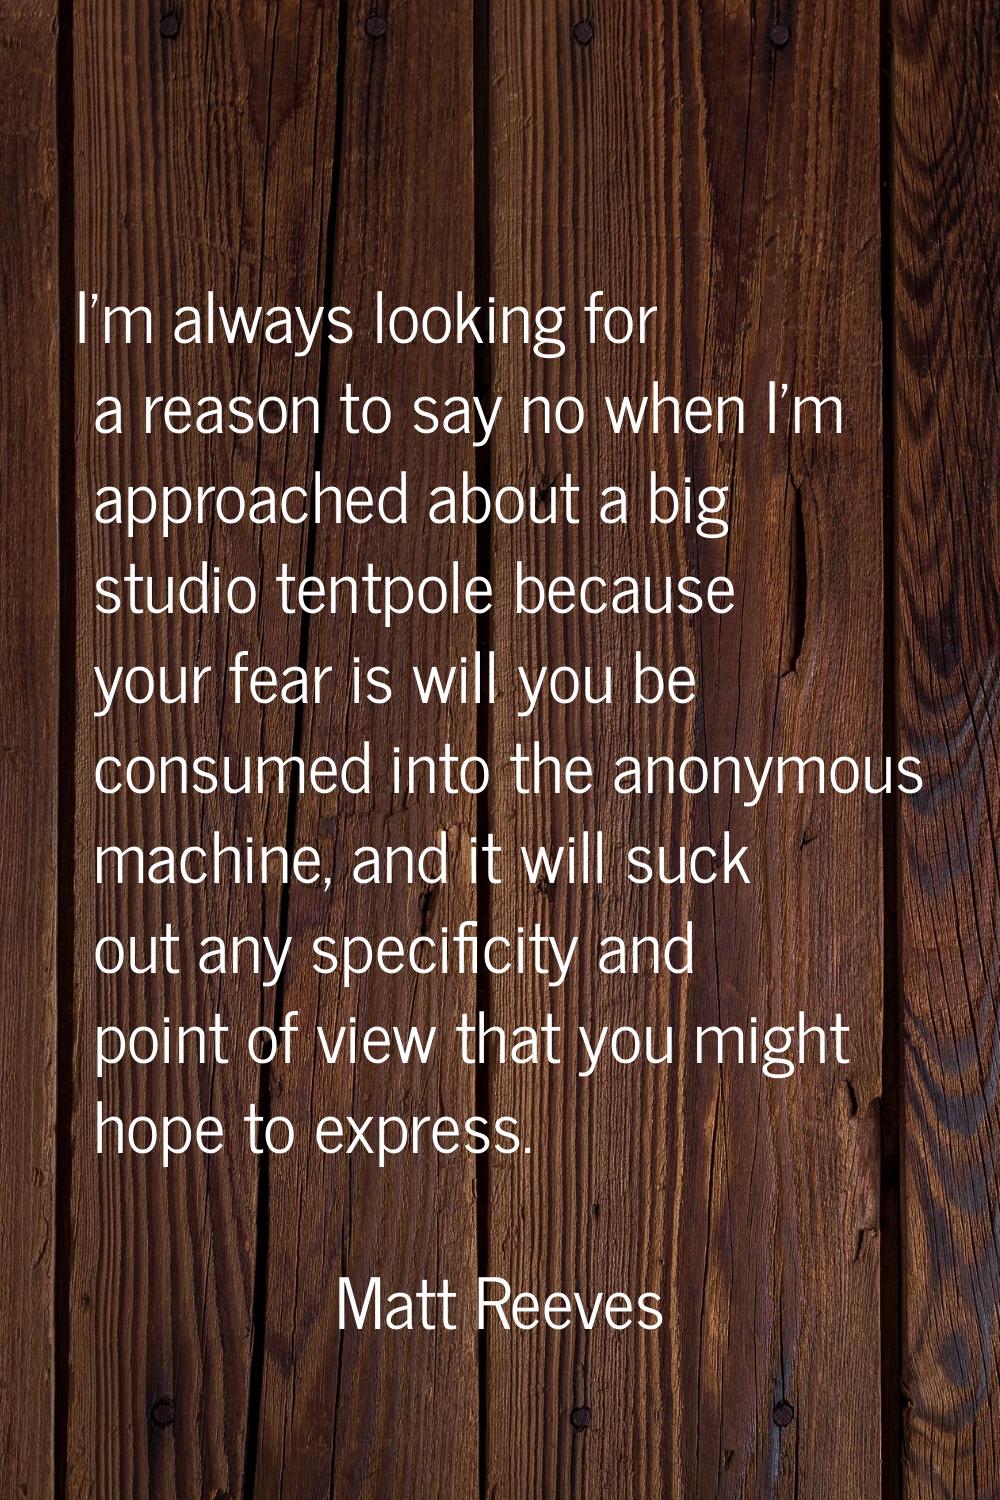 I'm always looking for a reason to say no when I'm approached about a big studio tentpole because y